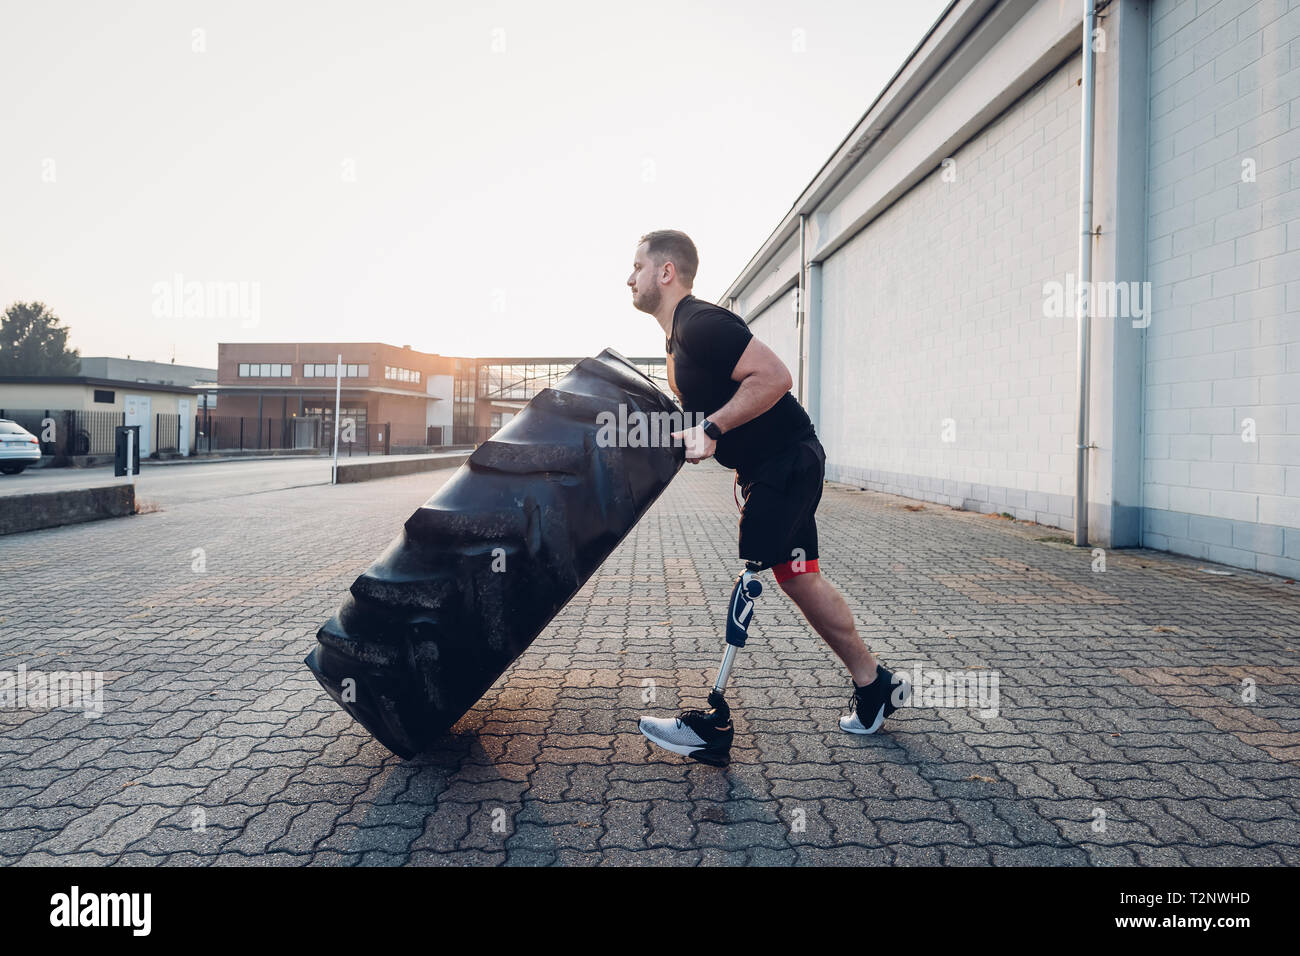 Man with prosthetic leg weight training with giant tyre Stock Photo